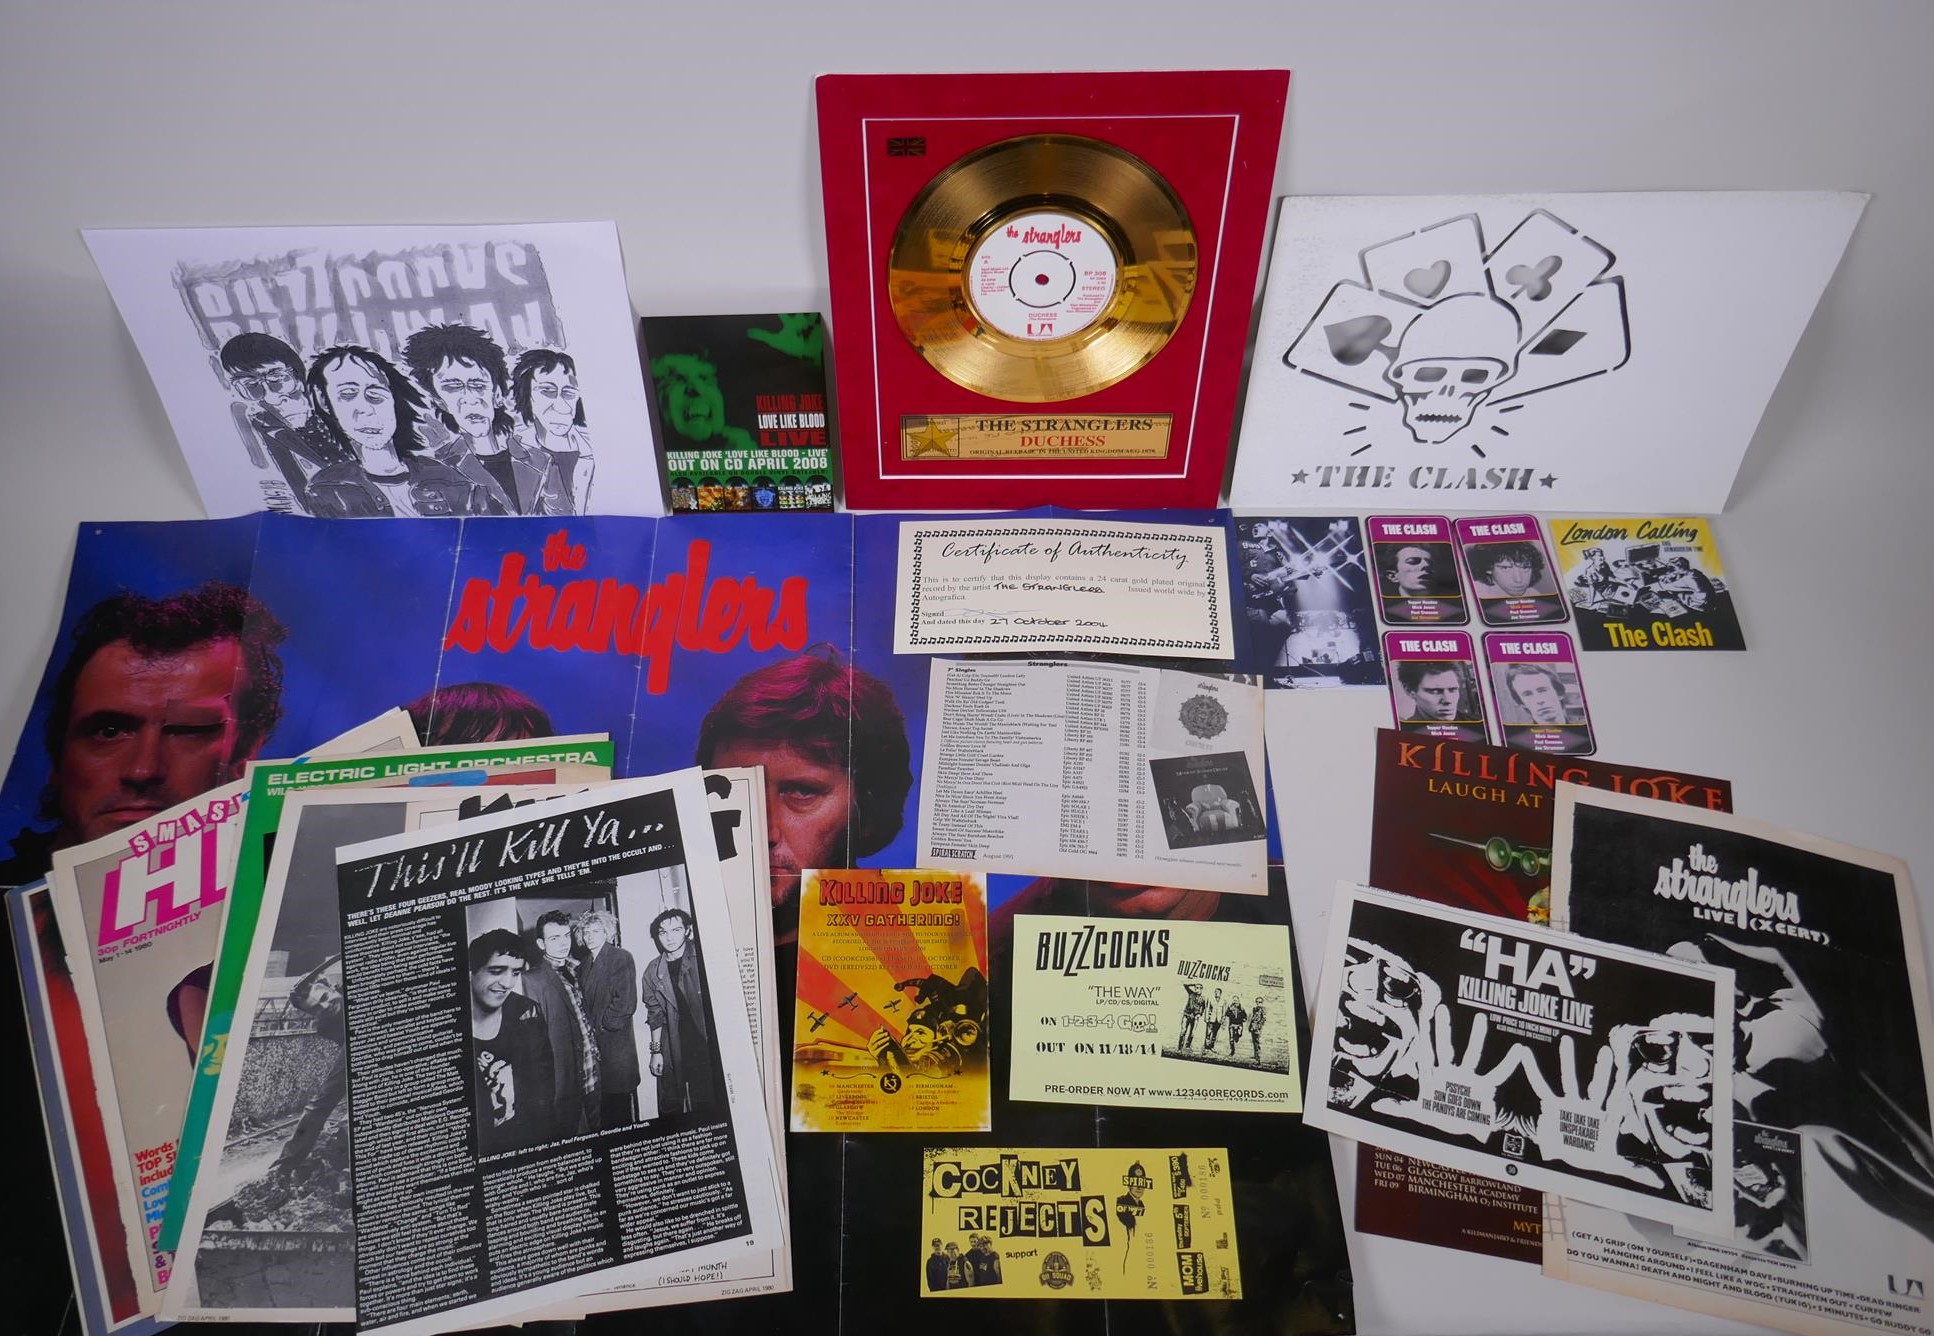 A quantity of punk ephemera, including a Stranglers gold disc for the Duchess, posters, ticket